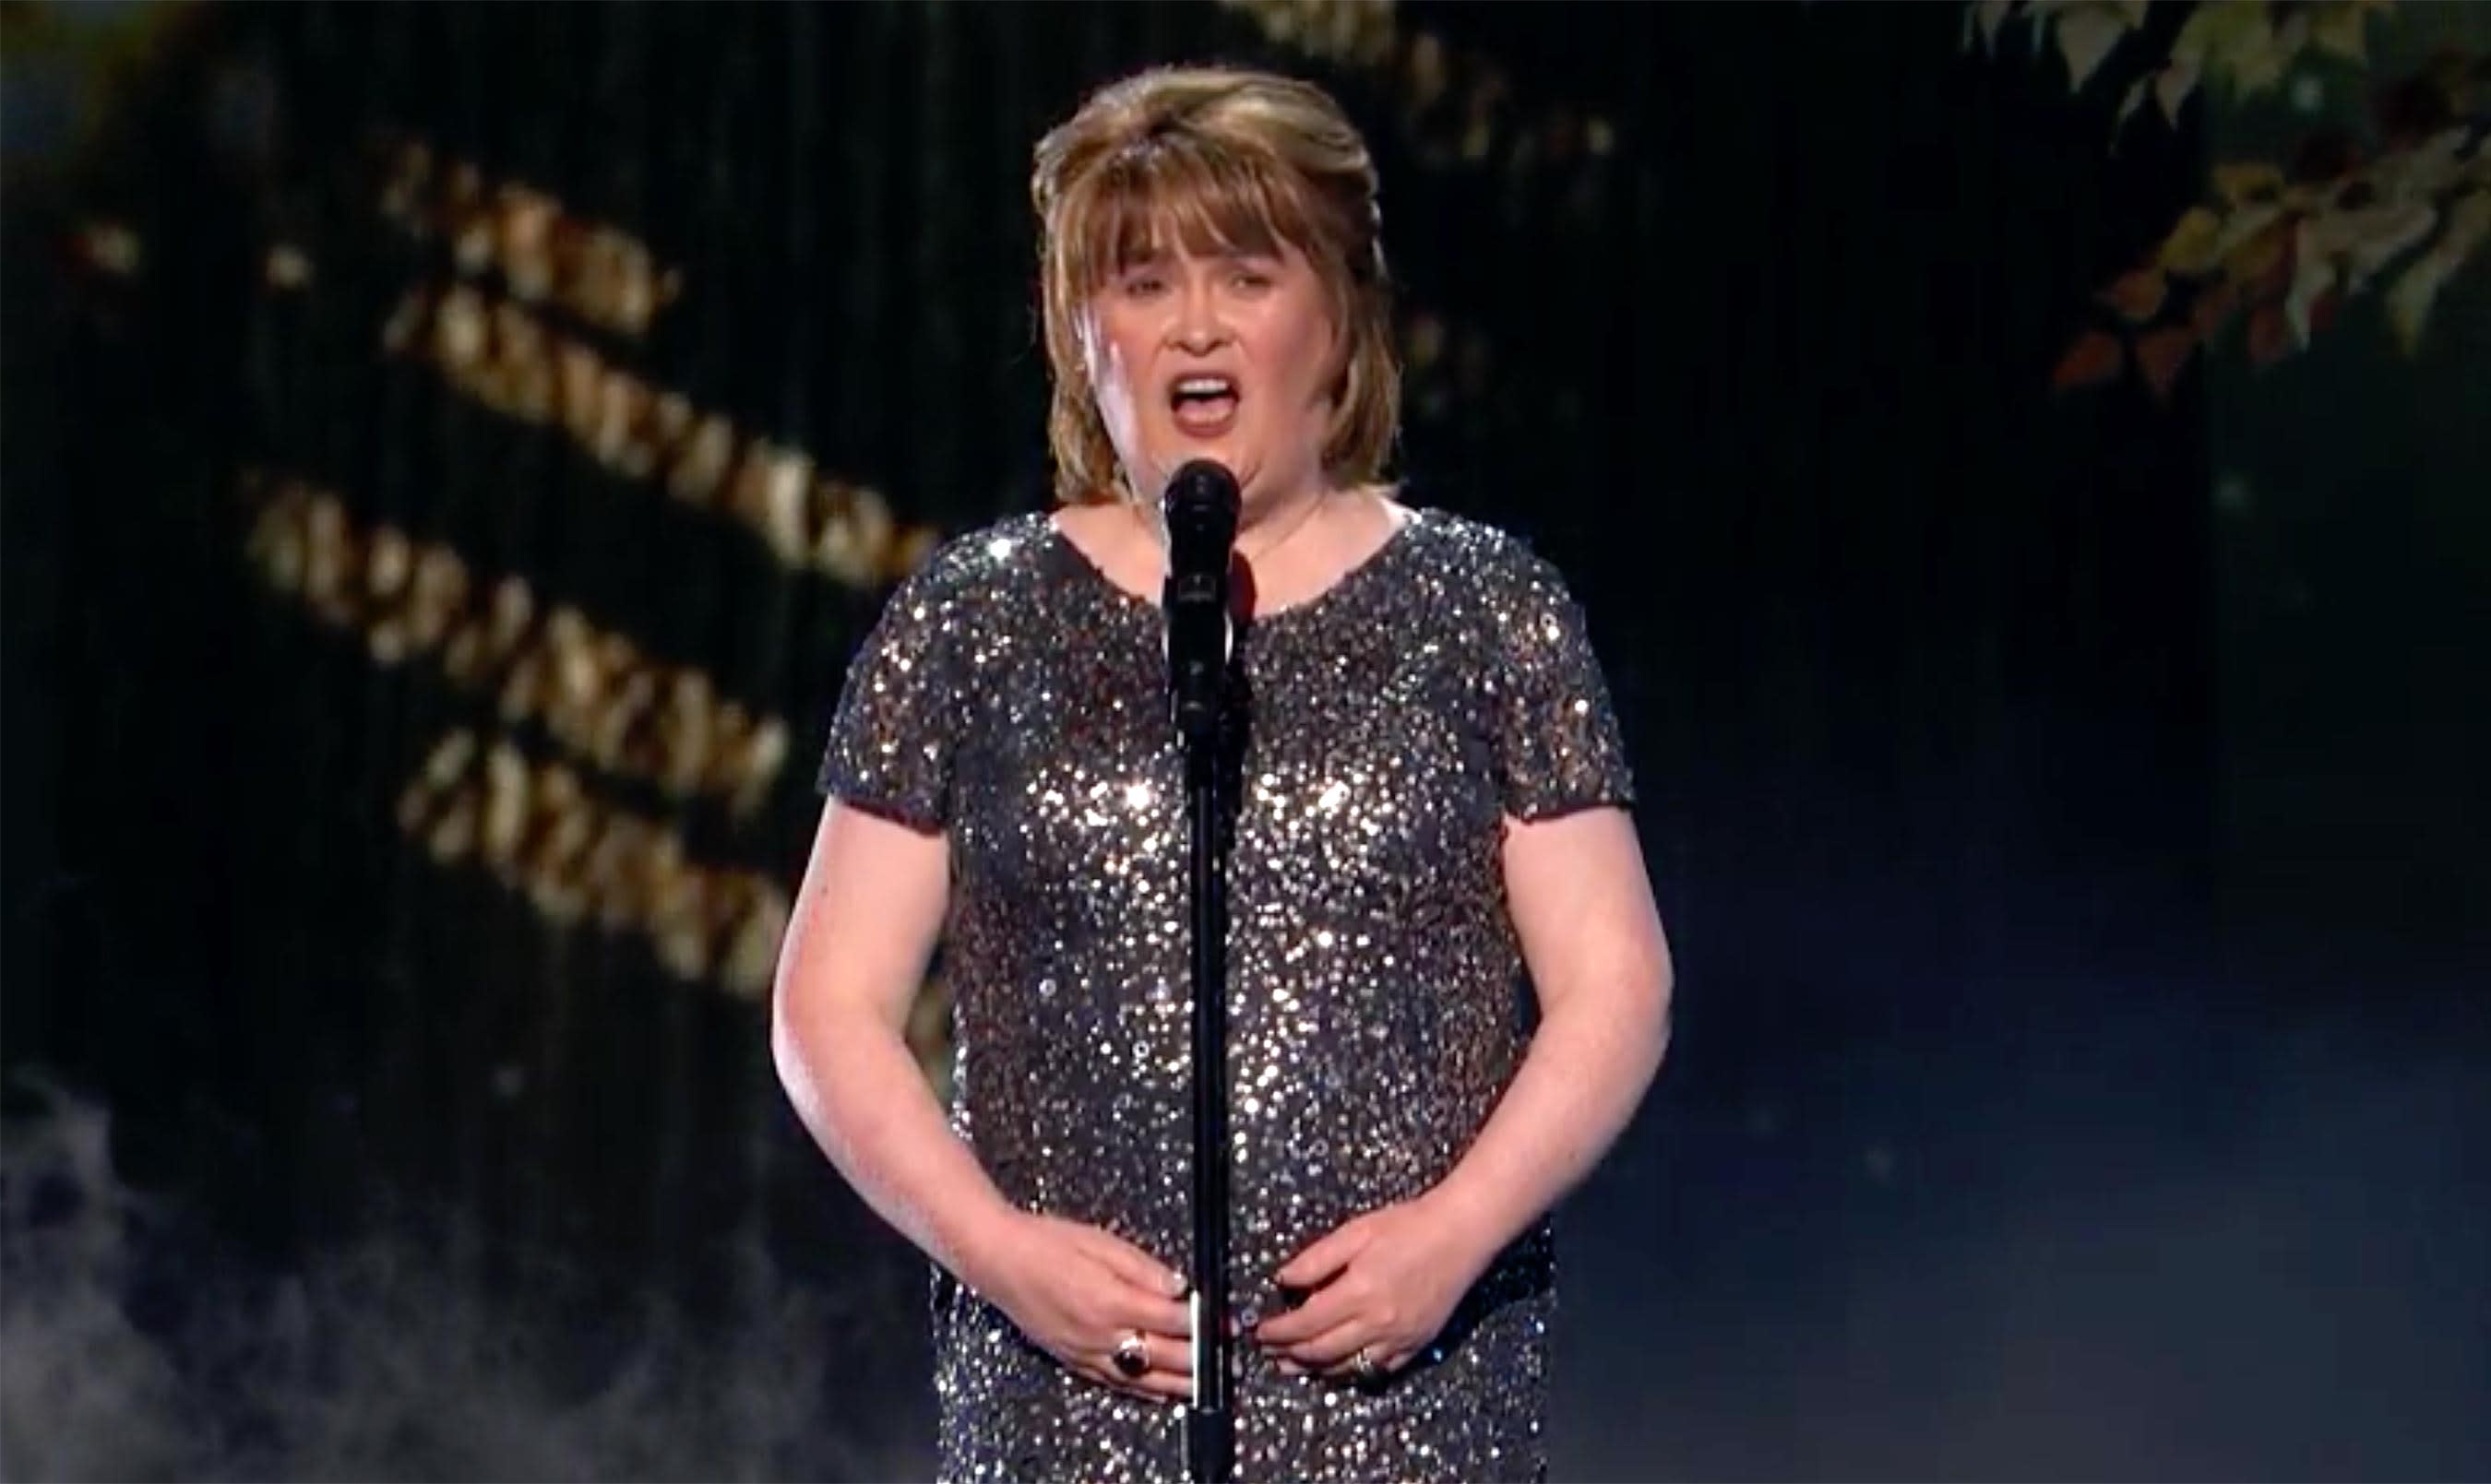 Susan Boyle Is Breathtaking in This First Look of Her AGT The